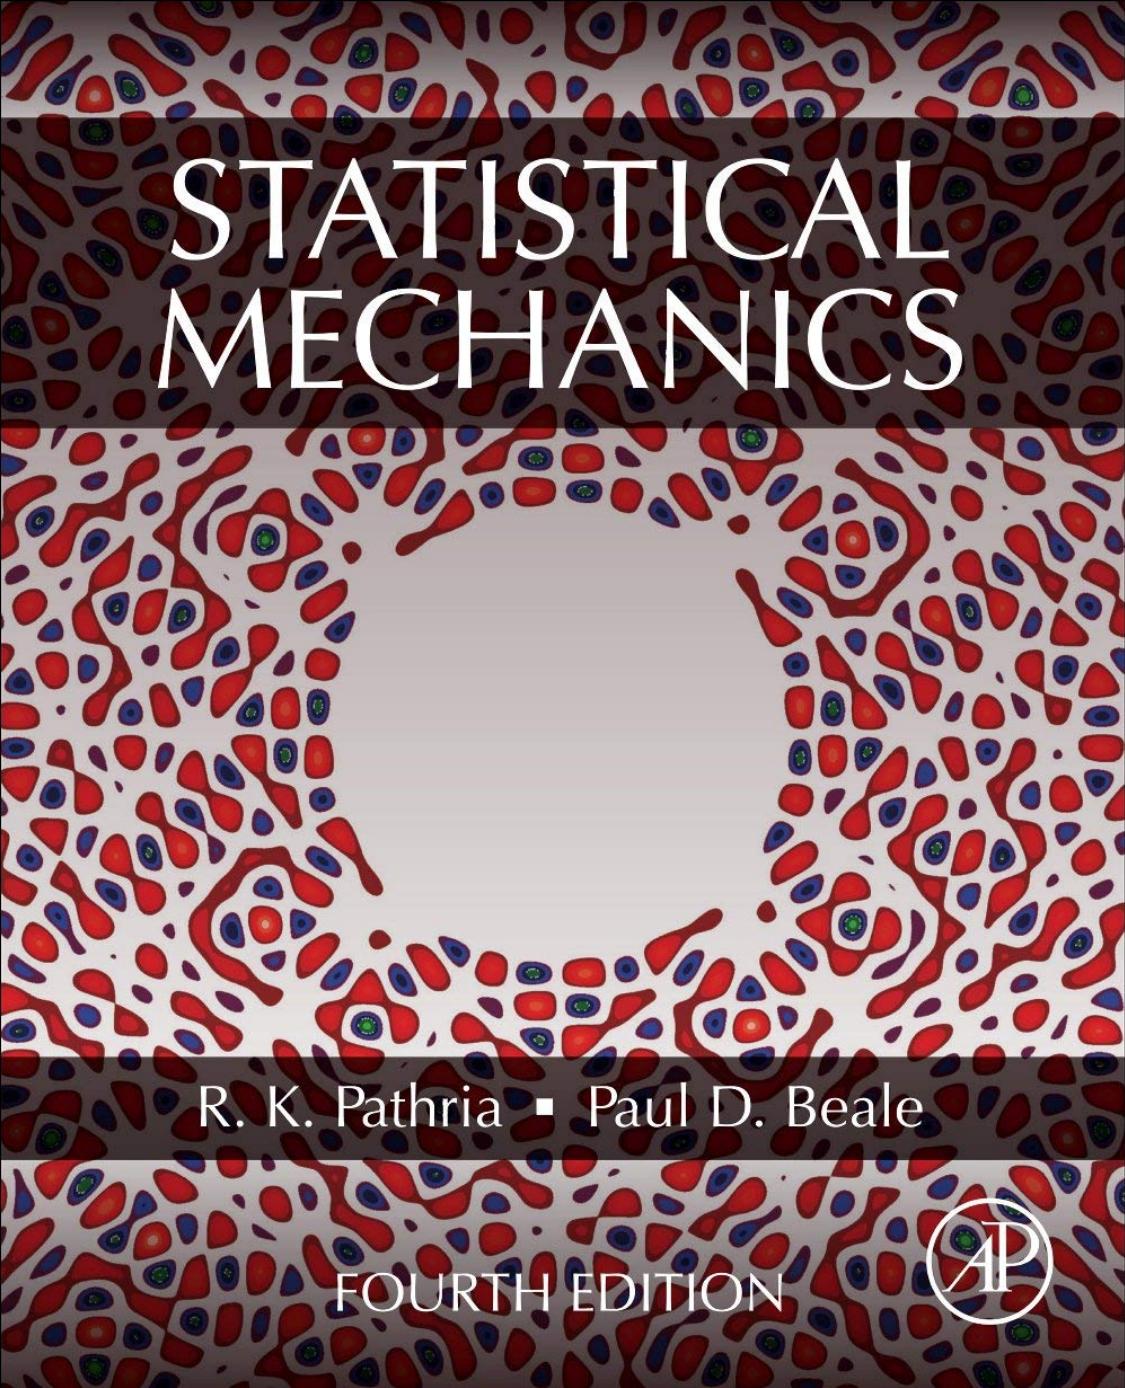 Statistical Mechanics 4th Edition by R.K. Pathria , Paul D. Beale 